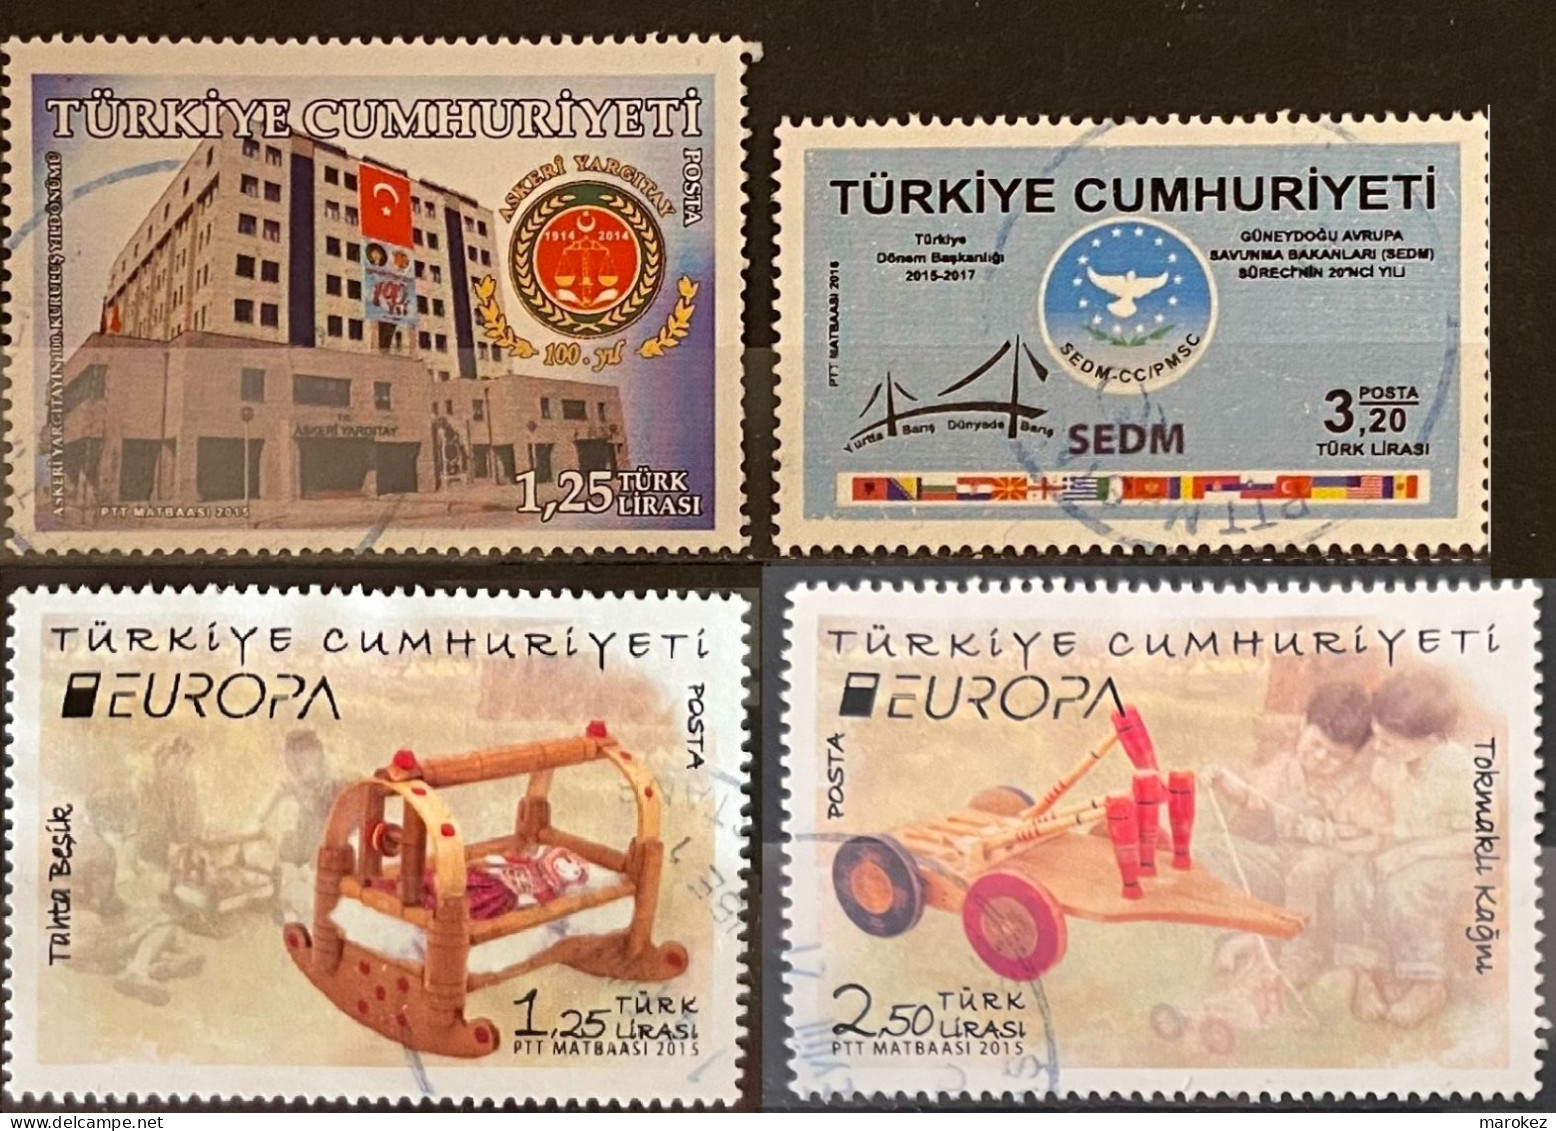 TURKEY 2015-2016 Institutions, Europa & Associations 4 Postally Used Stamps MICHEL # 4166,4176,4177,4307 - Used Stamps